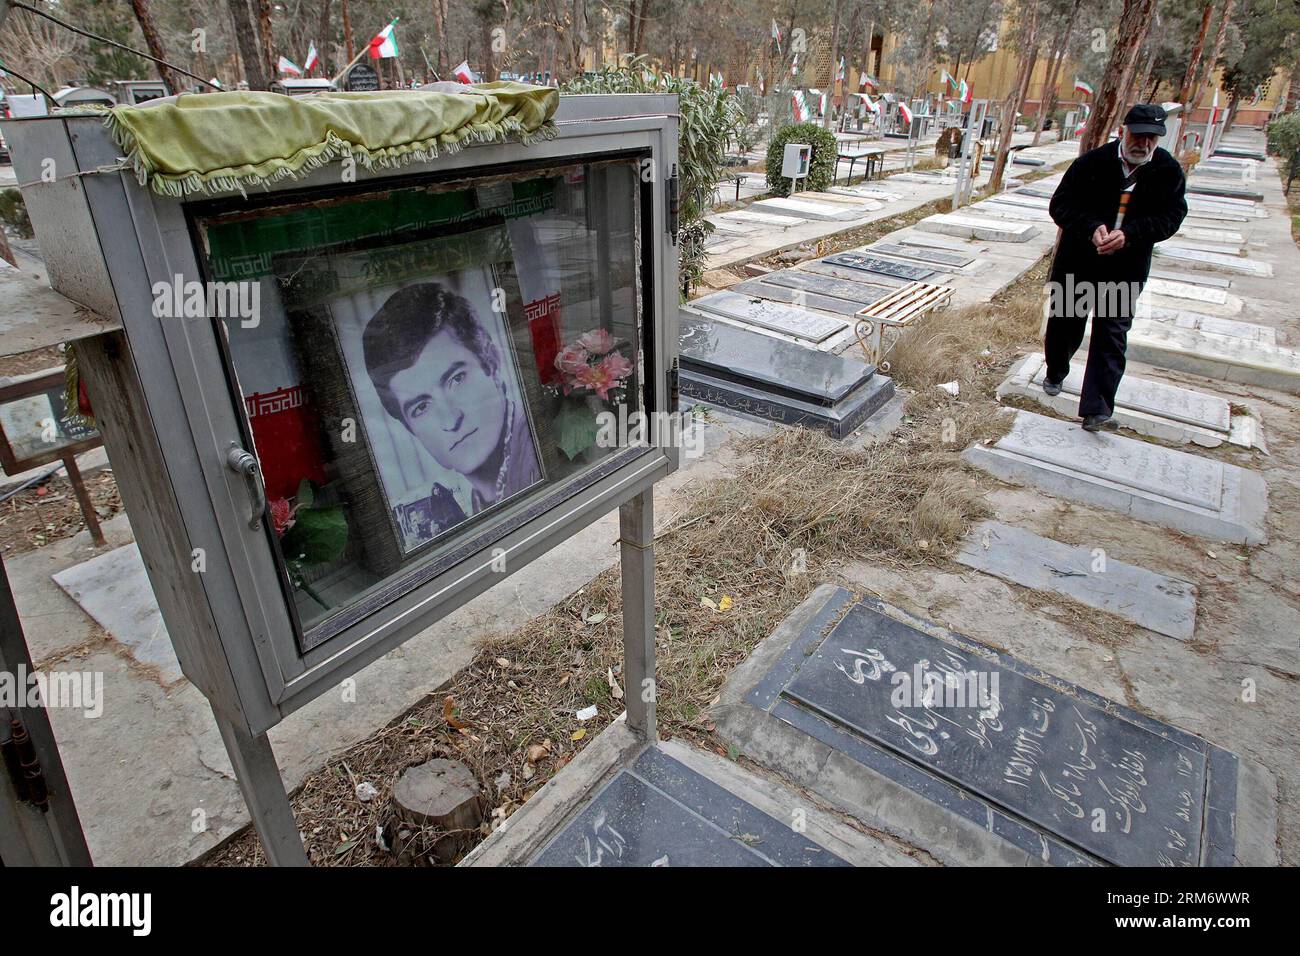 TEHRAN, (Xinhua) -- A man visits the graves of people who were killed during the 1979 Islamic revolution at the Behesht-e Zahra cemetery outside Tehran, Iran, on Feb. 1, 2014, to mark the 35th anniversary of the Islamic revolution. (Xinhua/AhmadHalabisaz) IRAN-TEHRAN-ISLAMIC REVOLUTION-ANNIVERSARY-CEMETERY PUBLICATIONxNOTxINxCHN   TEHRAN XINHUA a Man visits The Graves of Celebrities Who Were KILLED during The 1979 Islamic Revolution AT The Behesht e Zahra Cemetery outside TEHRAN Iran ON Feb 1 2014 to Mark The 35th Anniversary of The Islamic Revolution XINHUA  Iran TEHRAN Islamic Revolution Ann Stock Photo